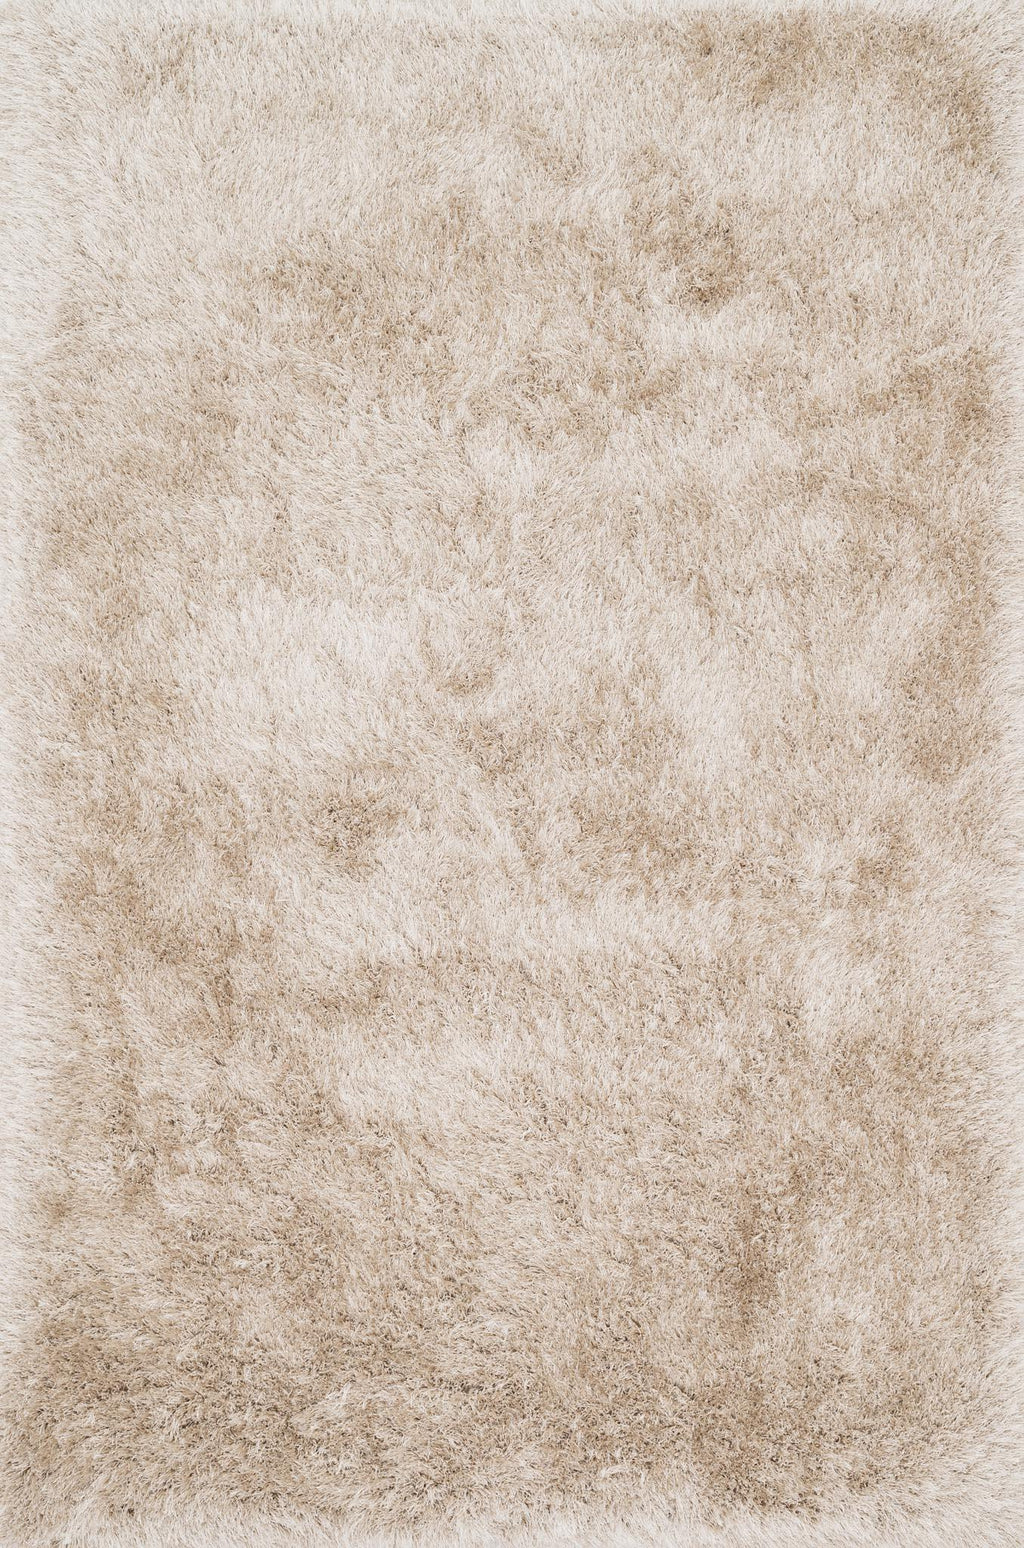 ORIAN SHAG Collection Rug  in  BEIGE Beige Small Hand-Woven Polyester